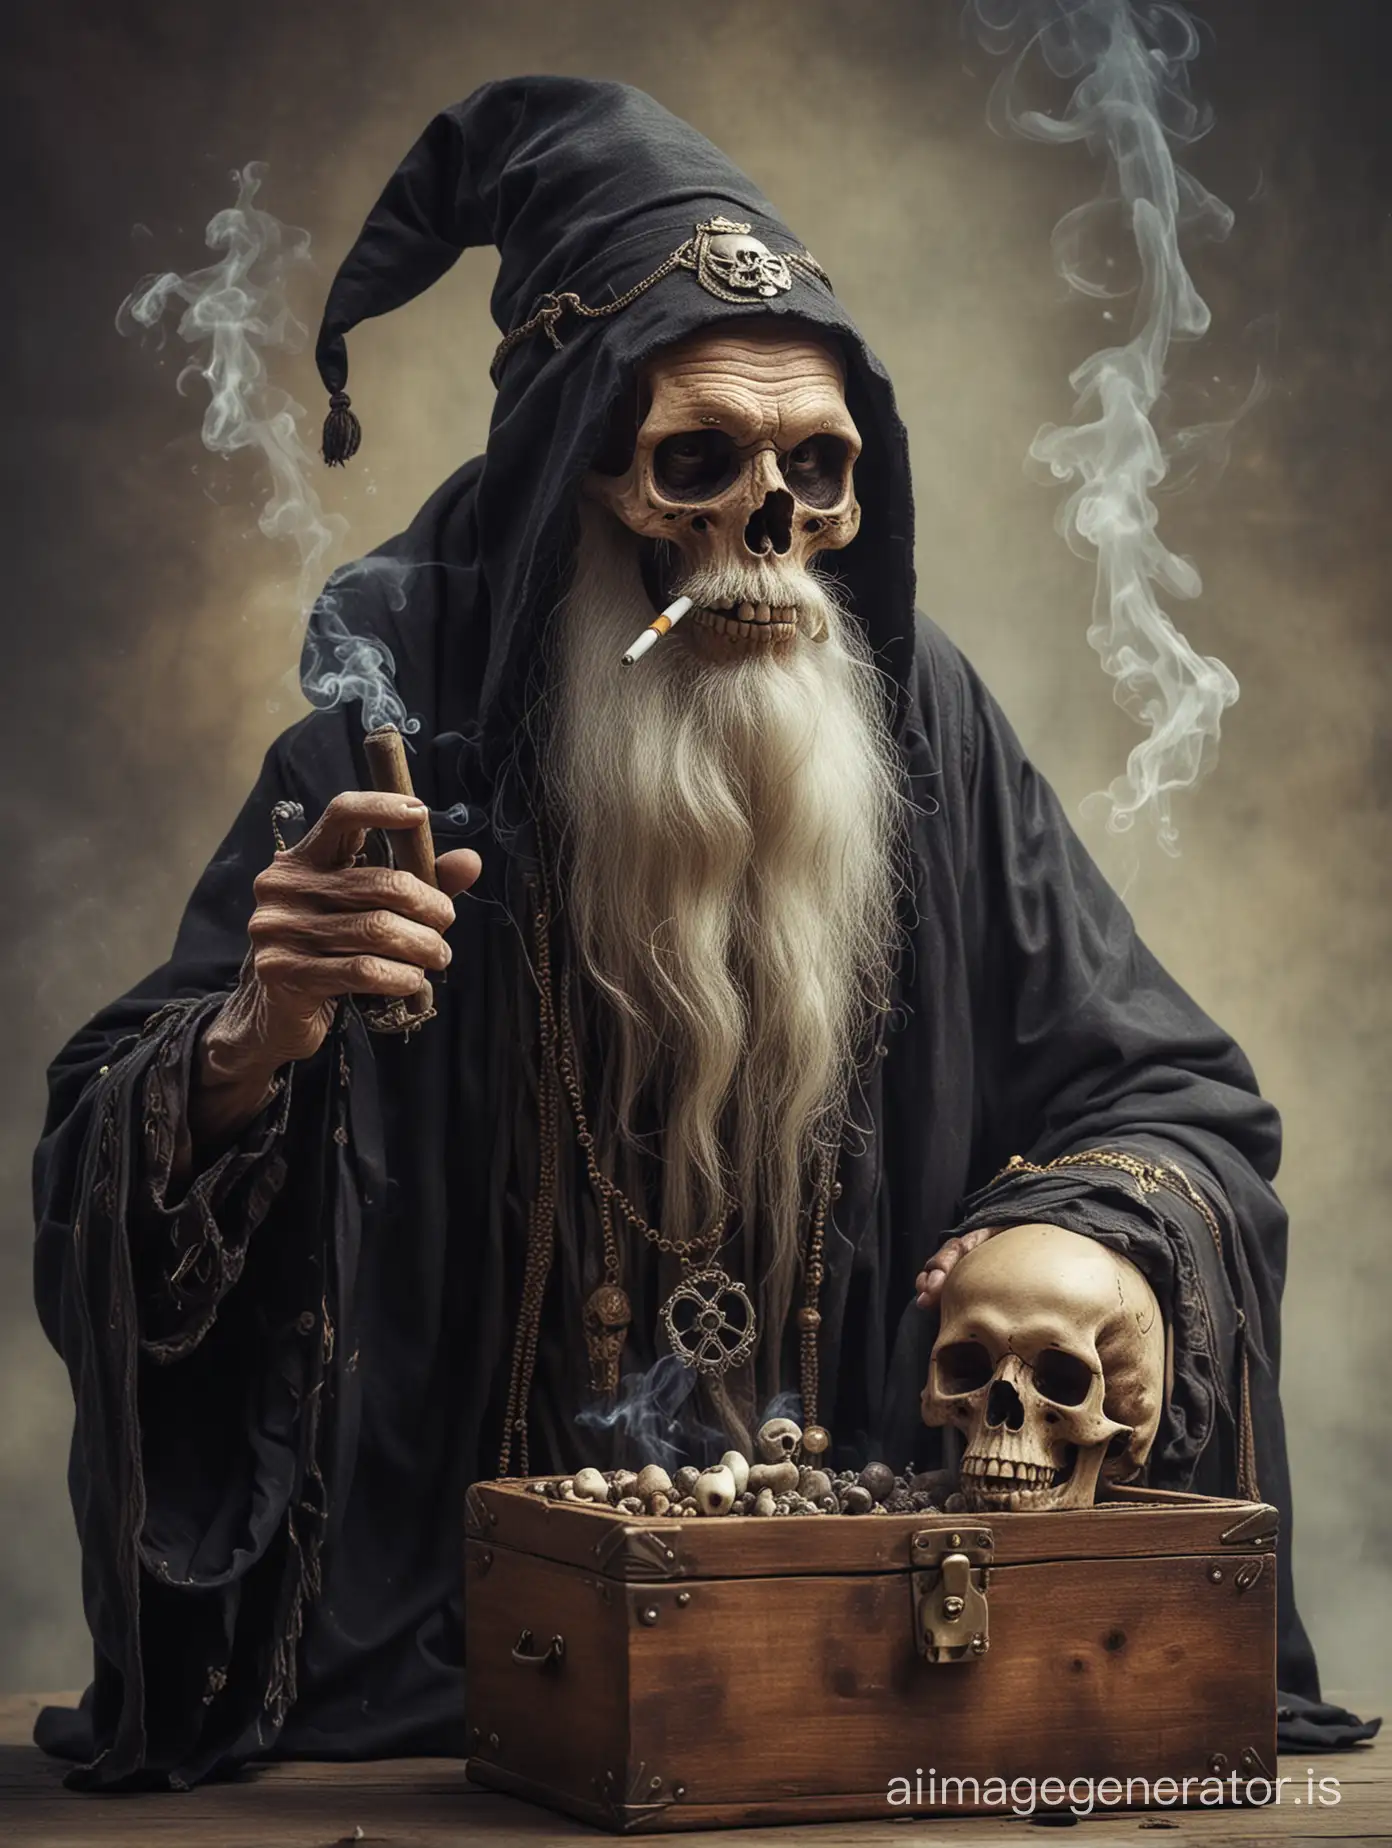 Elderly-Wizard-Engages-in-Arcane-Ritual-with-Skull-and-Mystical-Case